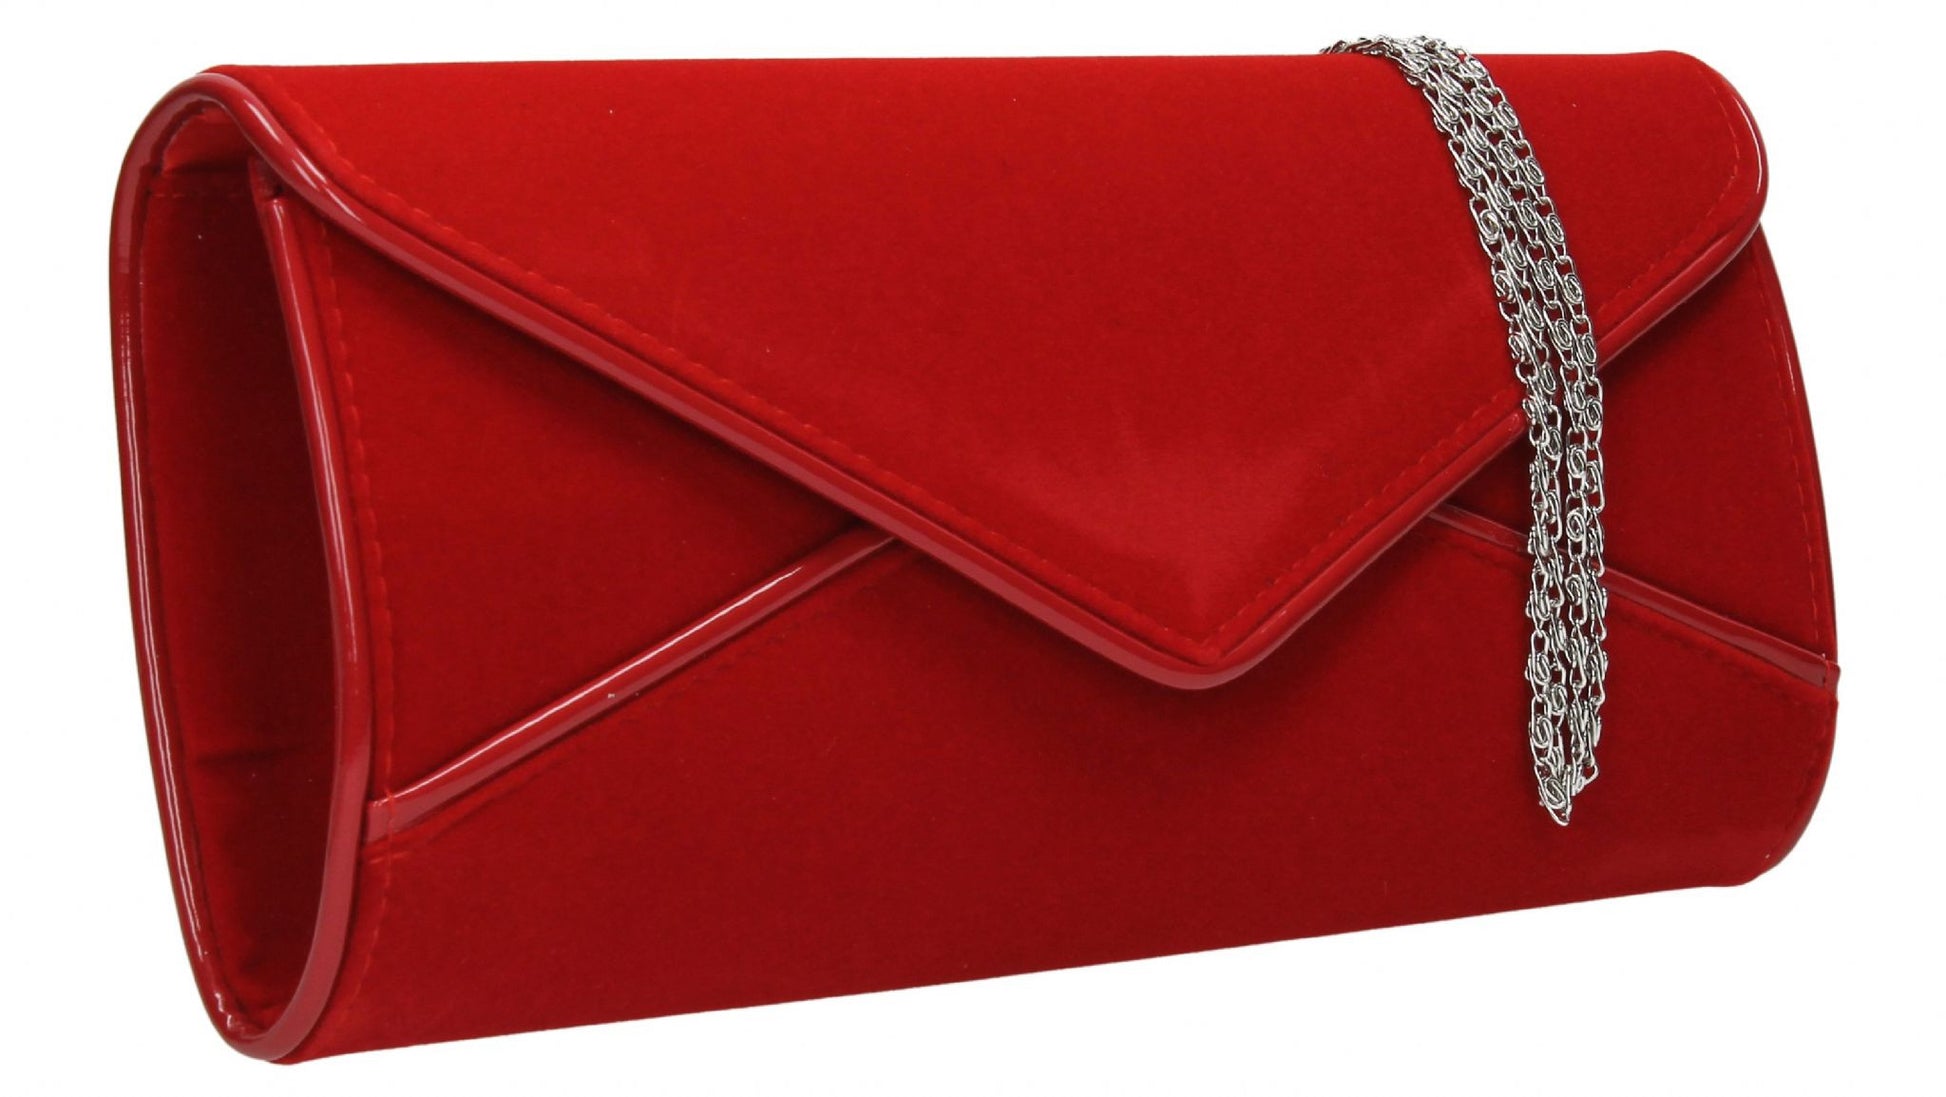 SWANKYSWANS Perry Velvet Clutch Bag - Red Cute Cheap Clutch Bag For Weddings School and Work